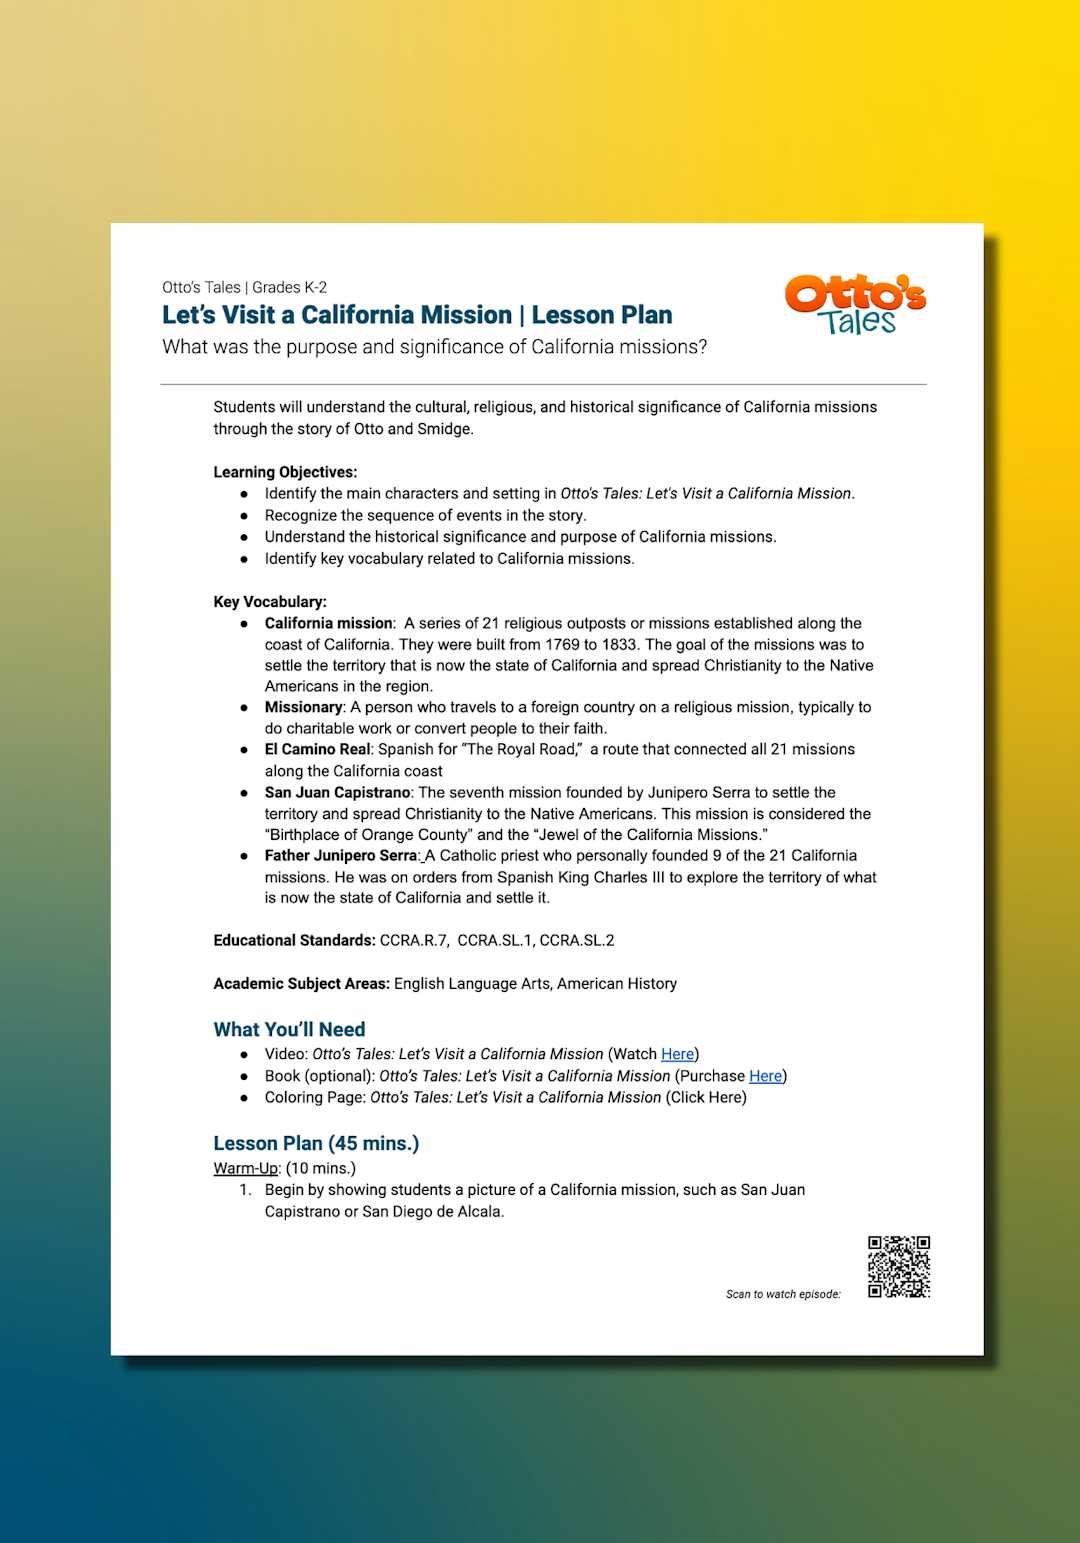 "Otto's Tales: Let's Visit a California Mission" Lesson Plan